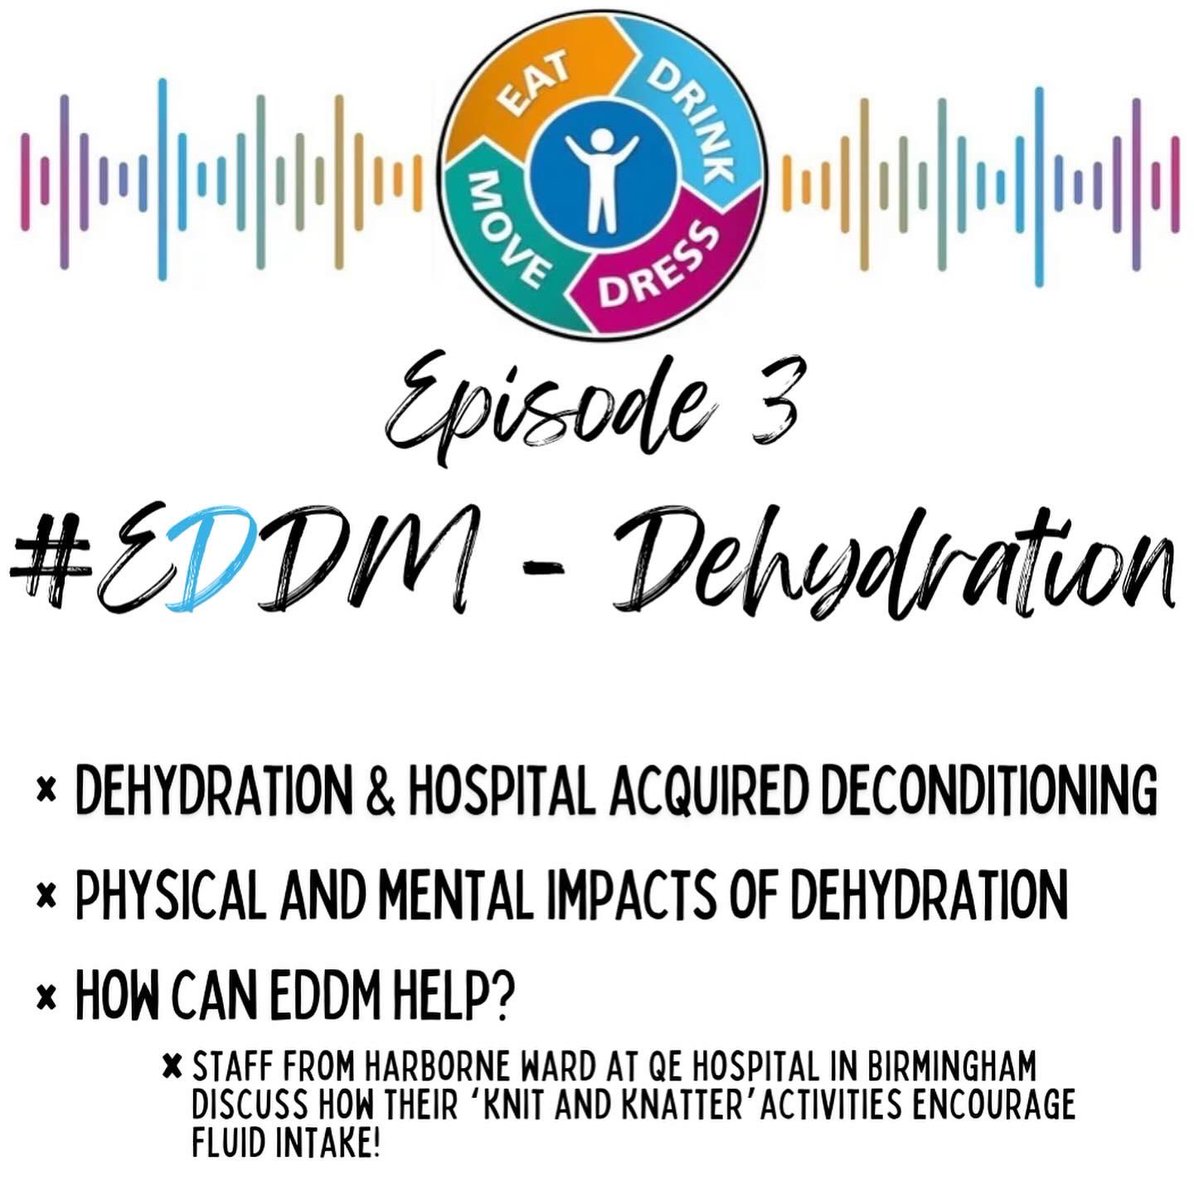 The next #theEDDMpodcast episode goes live on 05.06.24 and focuses on a ‘Drink’ topic - Dehydration! In this episode, I speak about HAD & dehydration, the physical and mental impacts, and how #EDDM principles can help, with guests from Harborne ward at QE Hospital in Birmingham!